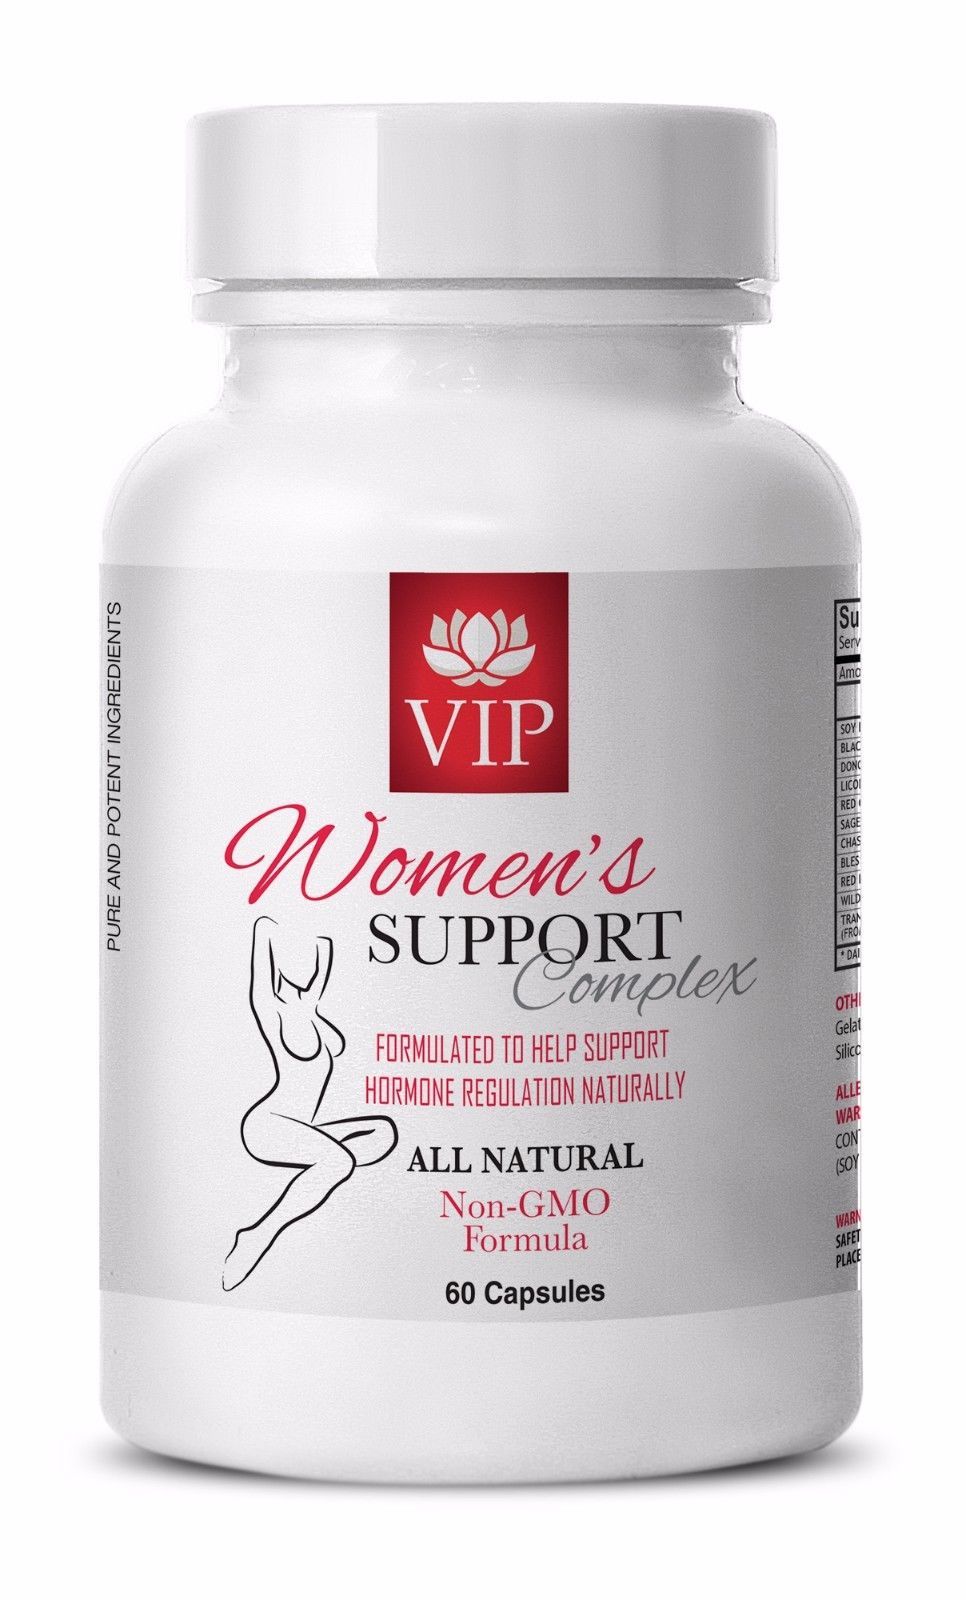 libido booster for women natural - WOMENS SUPPORT COMPLEX 1B - coenzyme a - $13.98